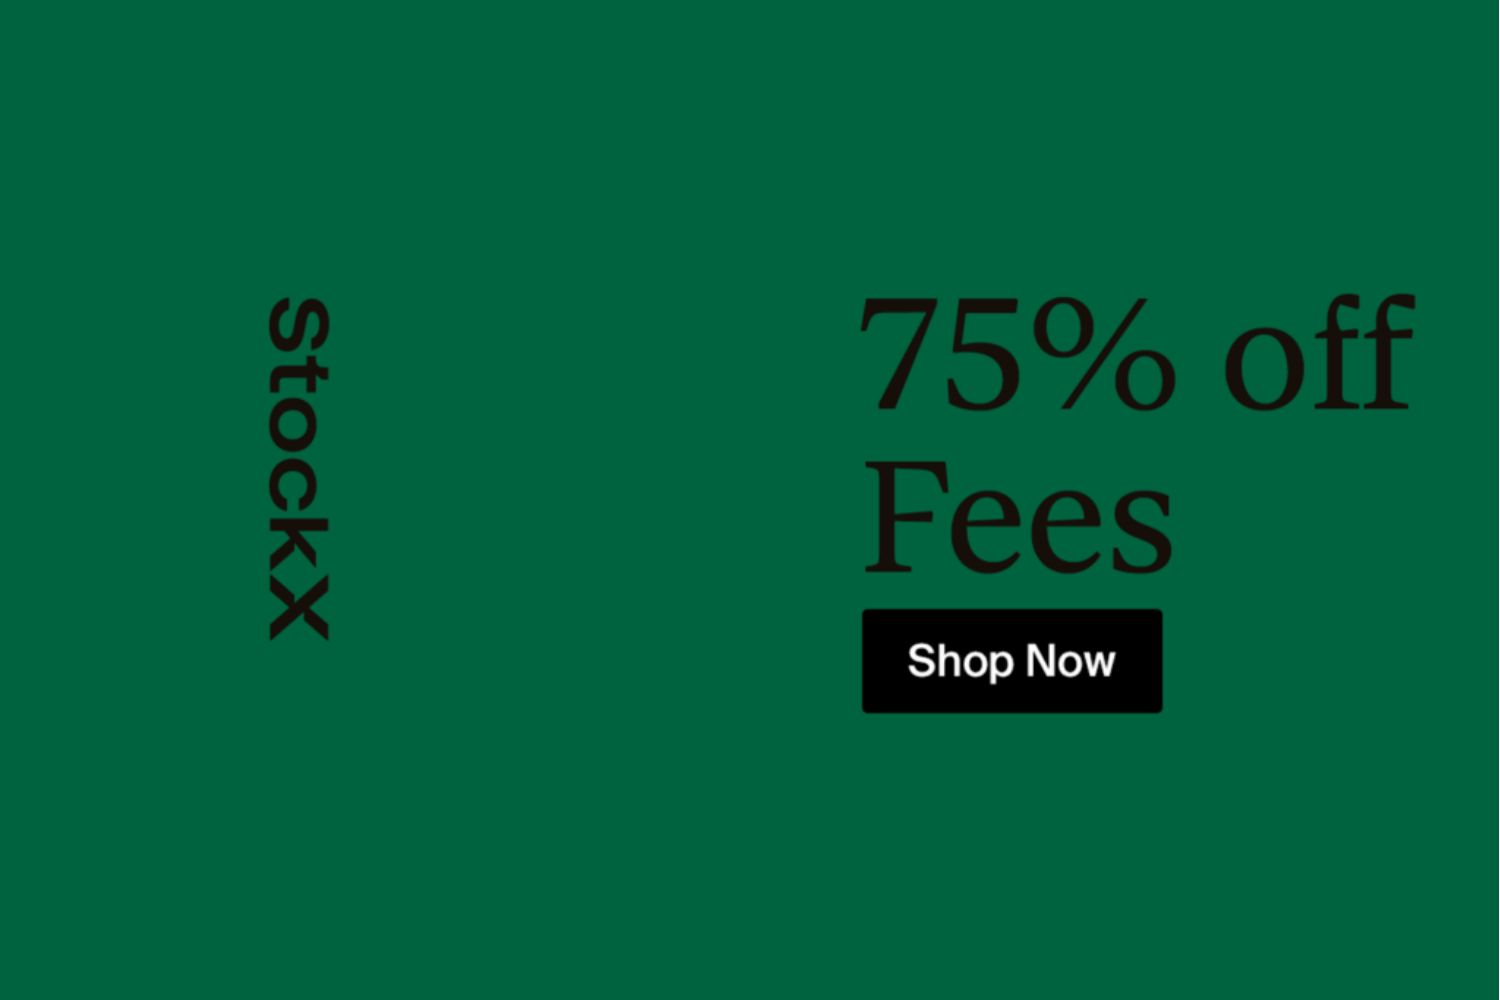 Receive 75% discount on fees at StockX